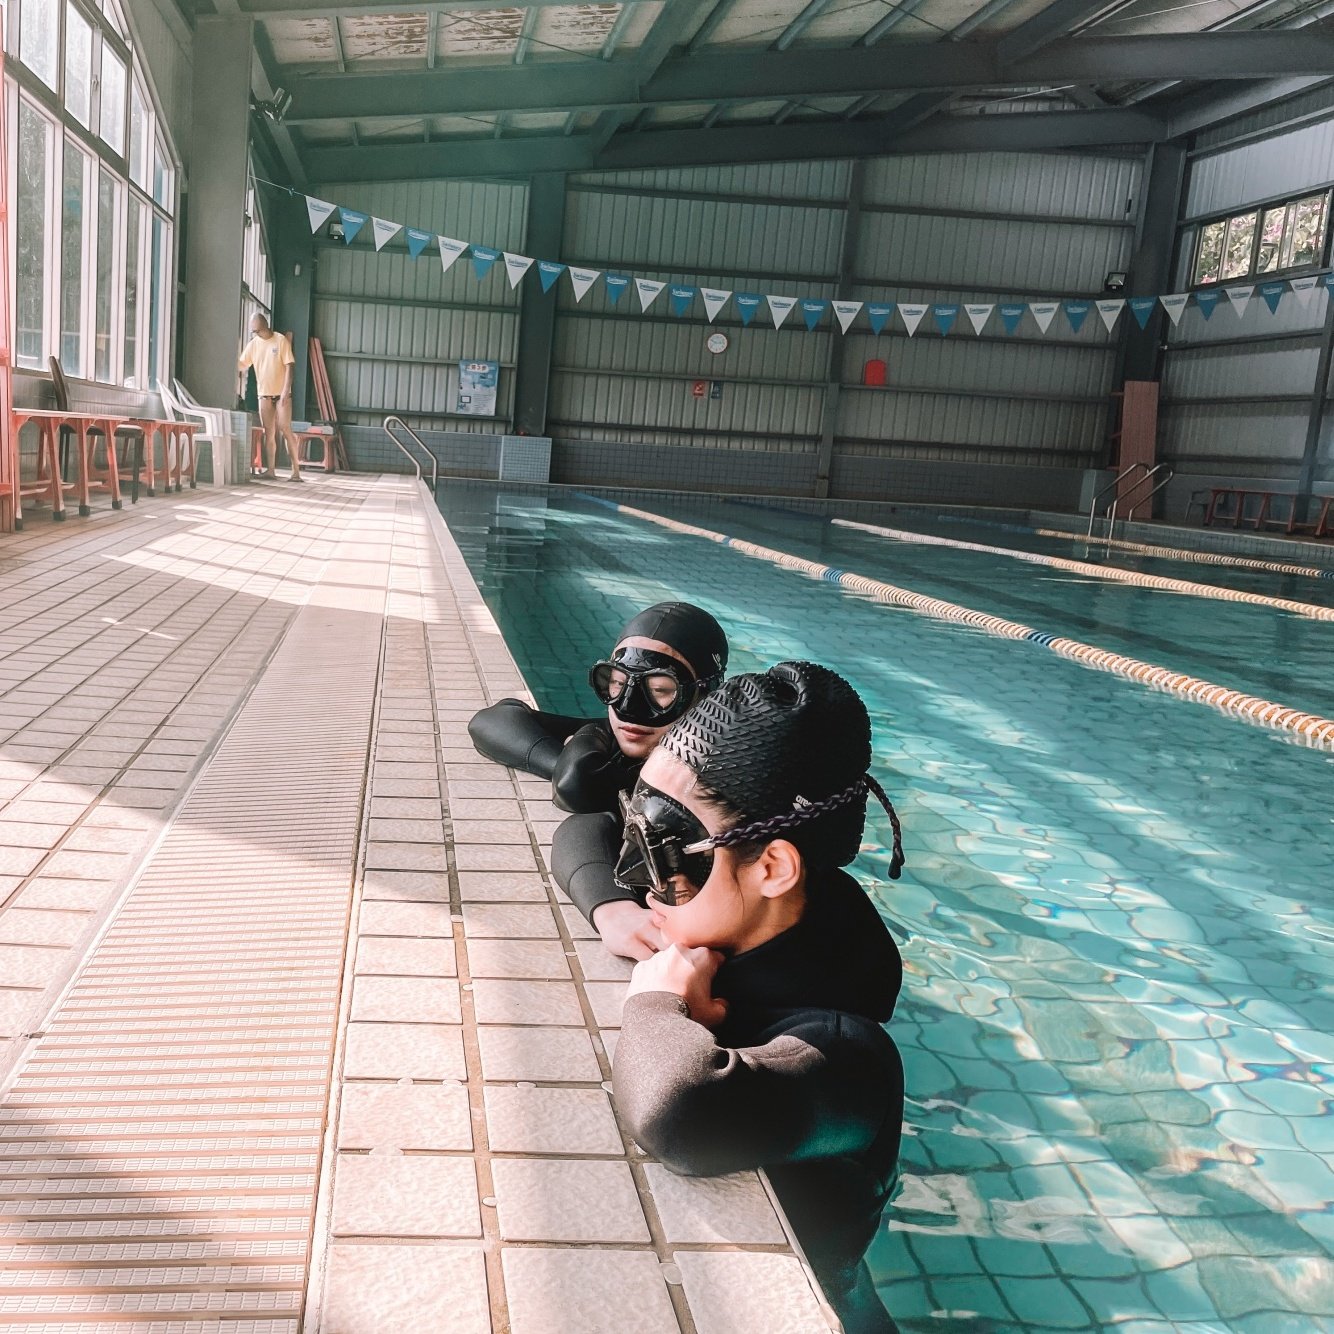 [Heyhey Dive Review] Super Chill Taichung Self Diving Studio, group training and diving trips make free diving a daily routine 30